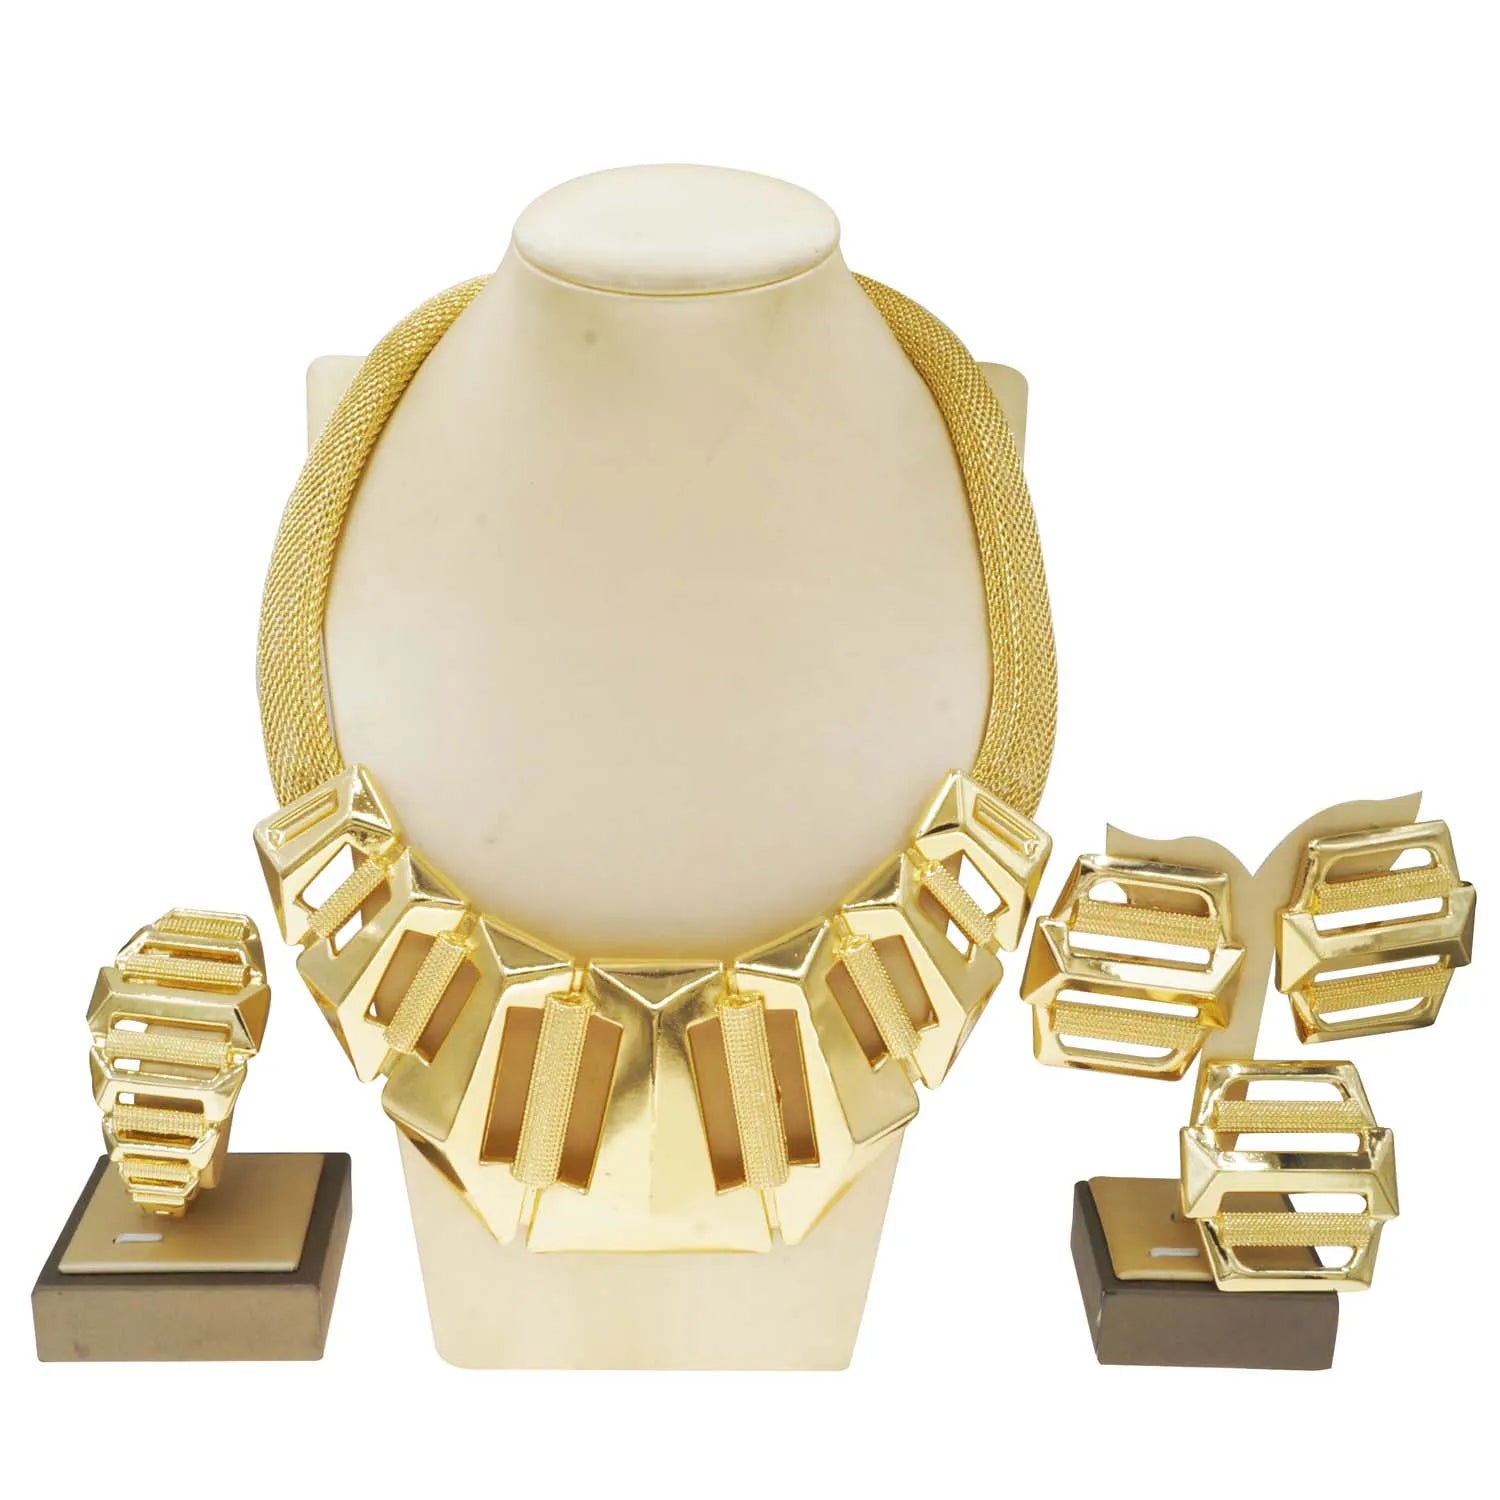 Dubai  Gold Color Glossy Necklace Earrings Bracelet Party Jewelry  Sets For Women